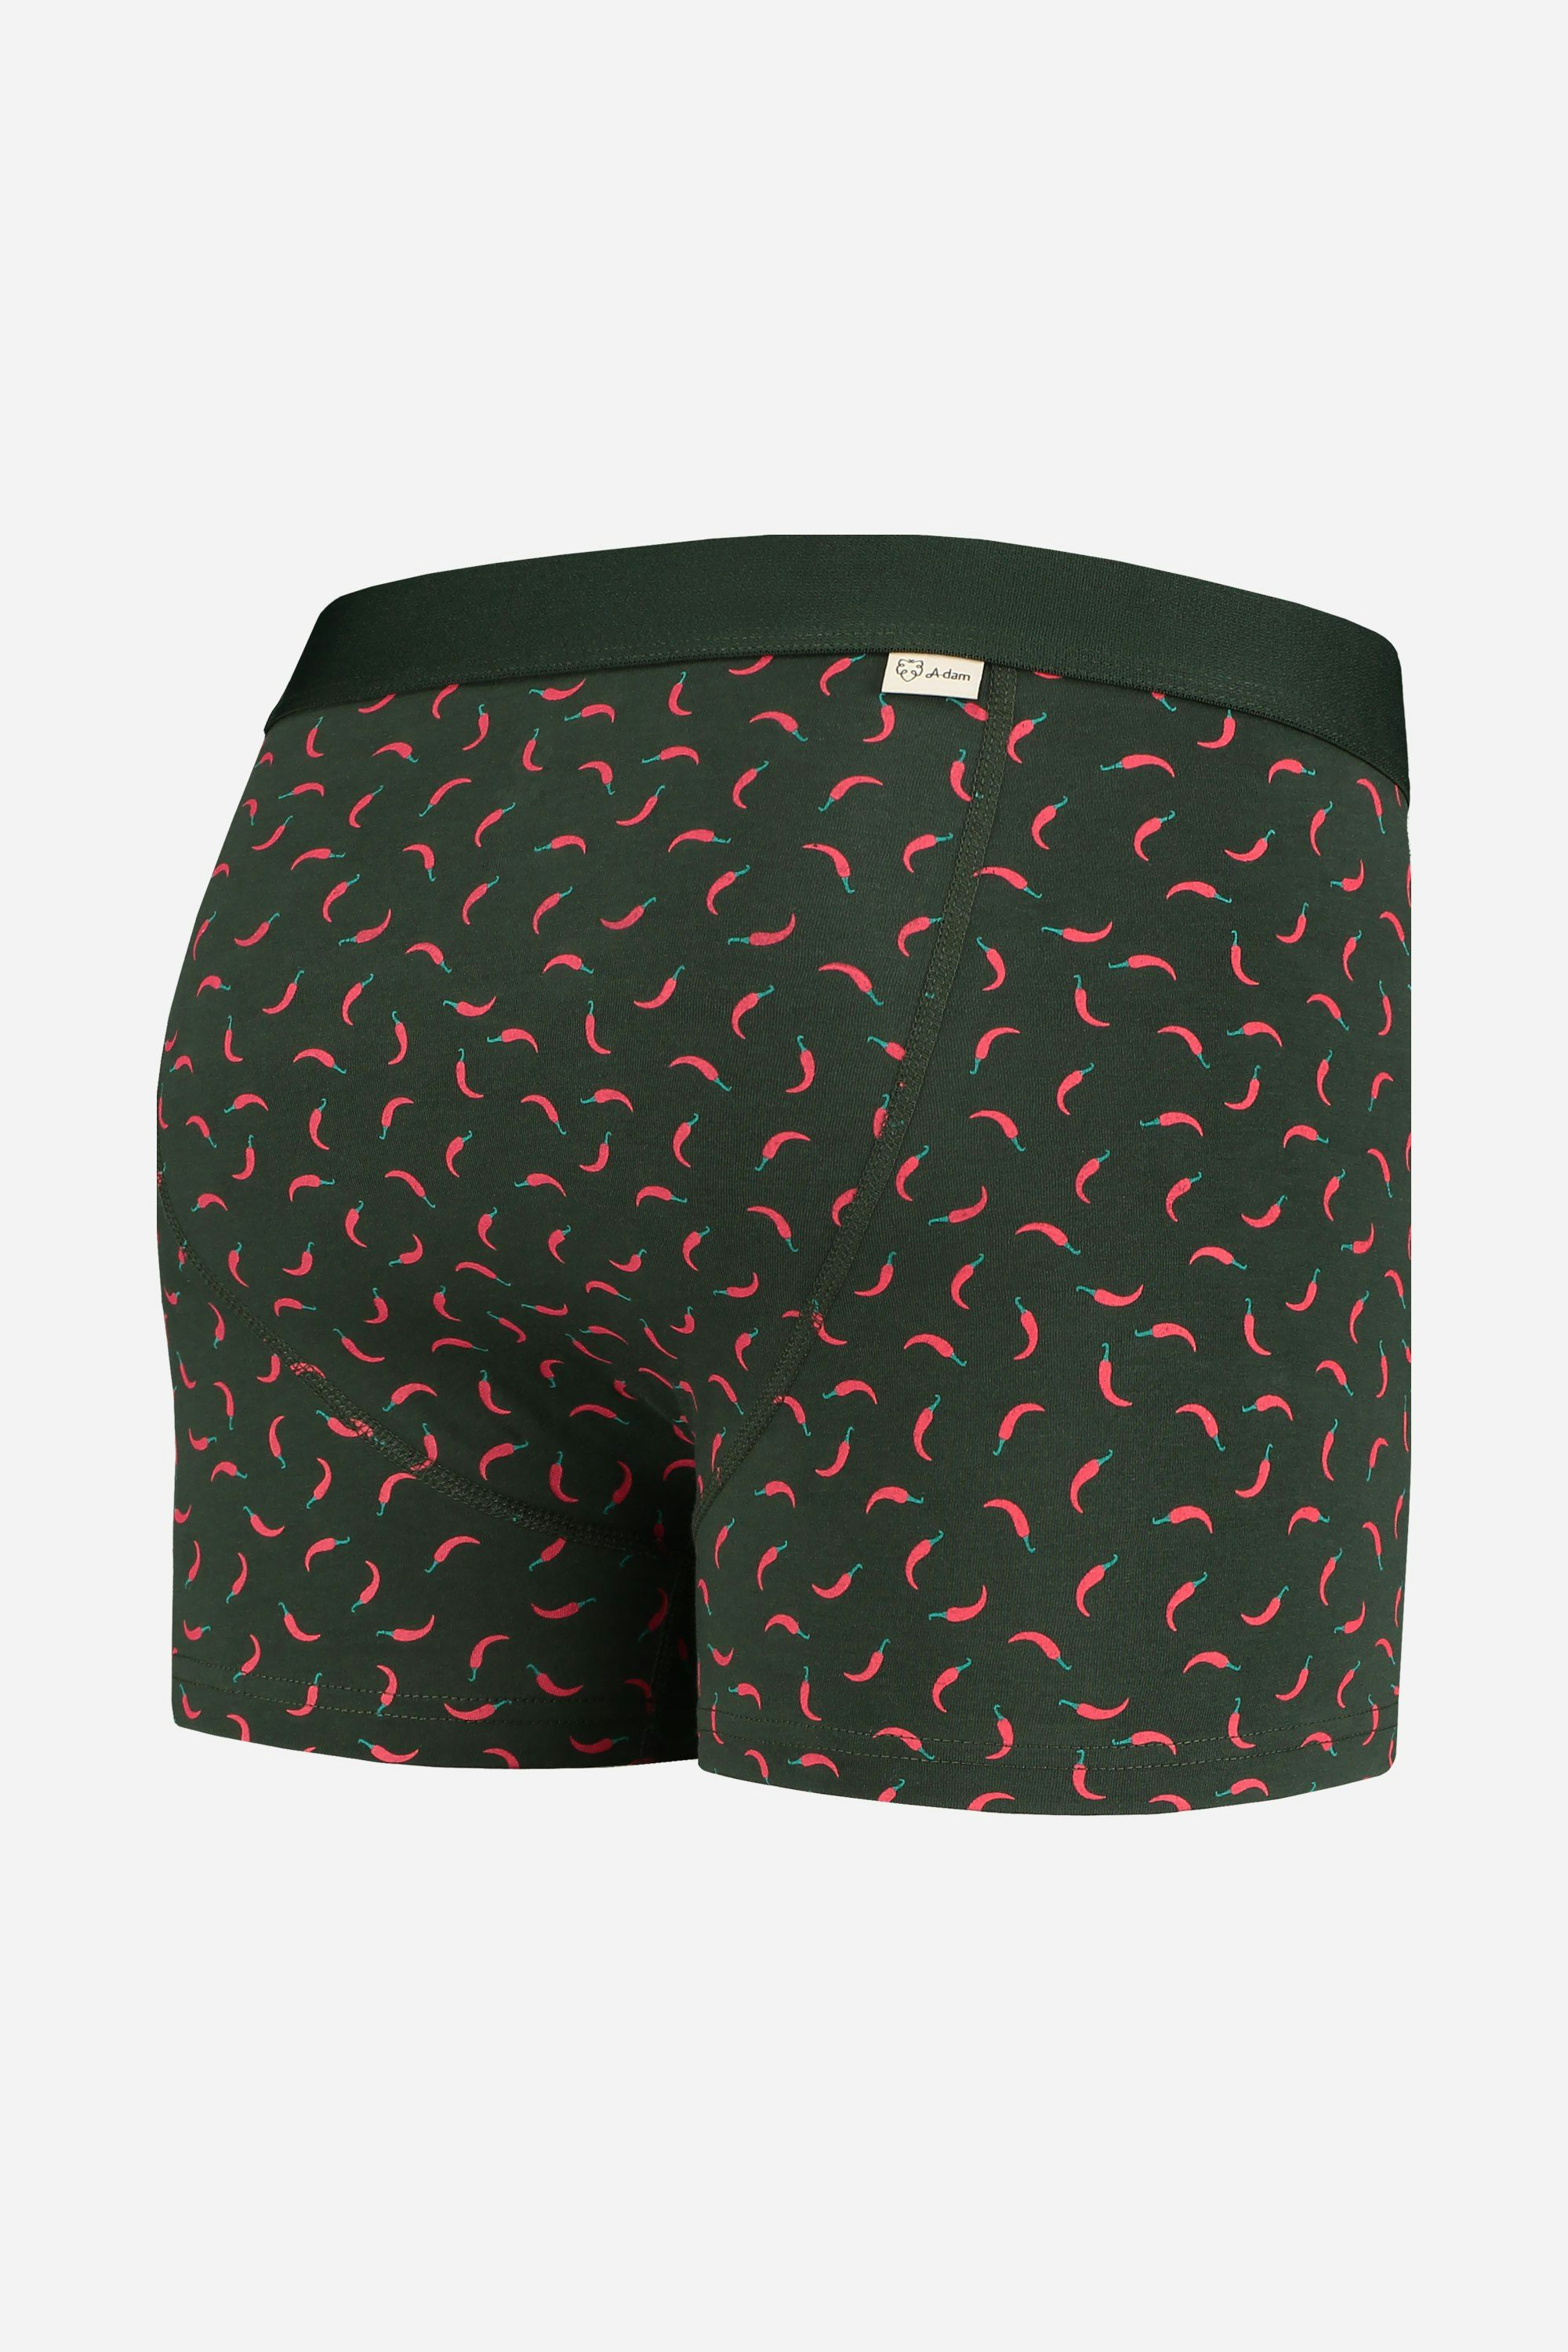 A-dam green boxer briefs with chilli peppers from GOTS organic cotton